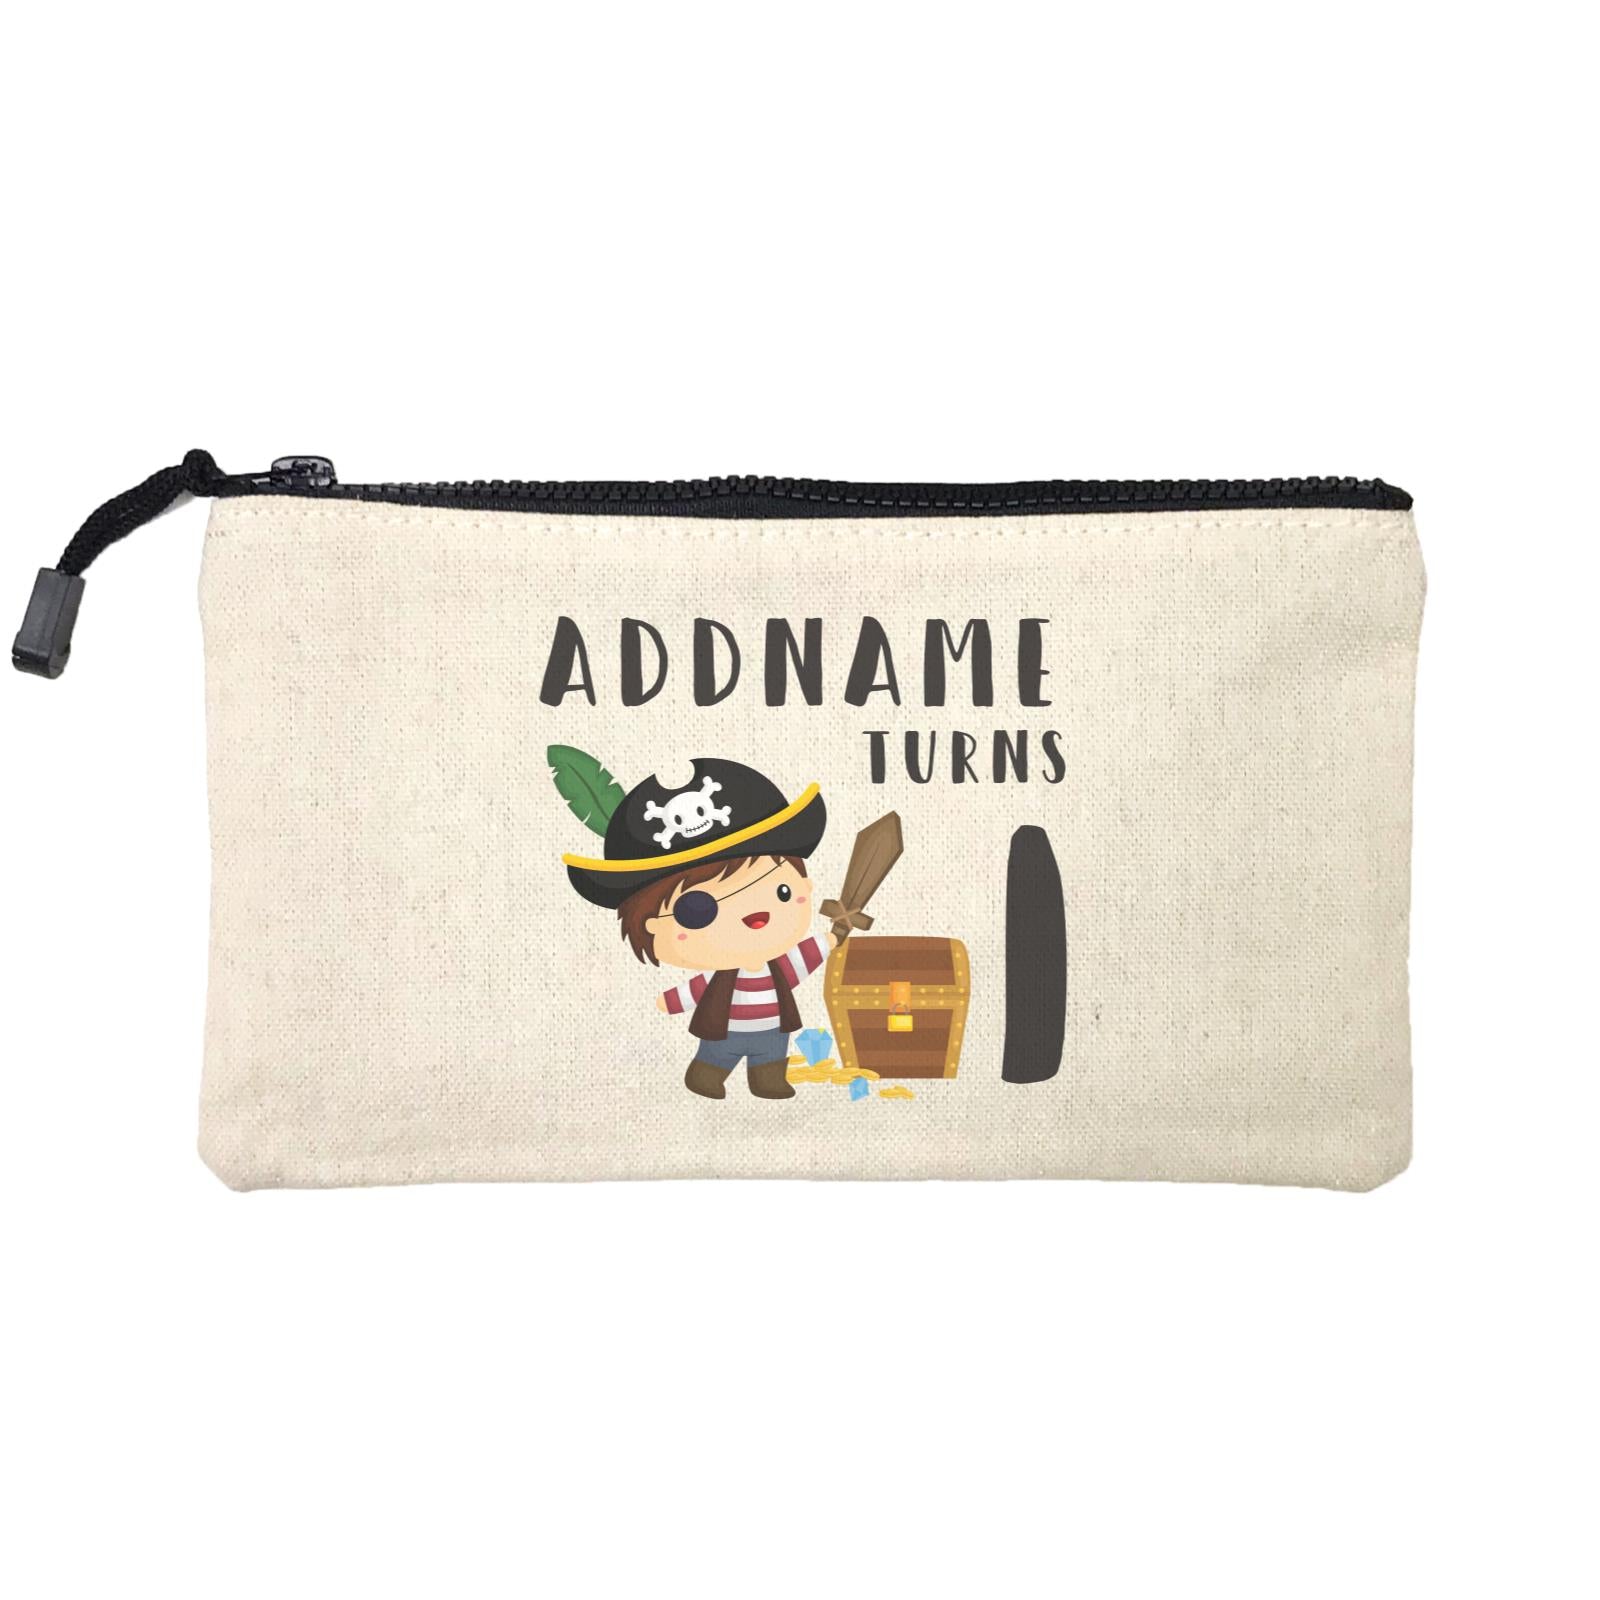 Birthday Pirate Happy Boy Captain With Treasure Chest Addname Turns 1 Mini Accessories Stationery Pouch